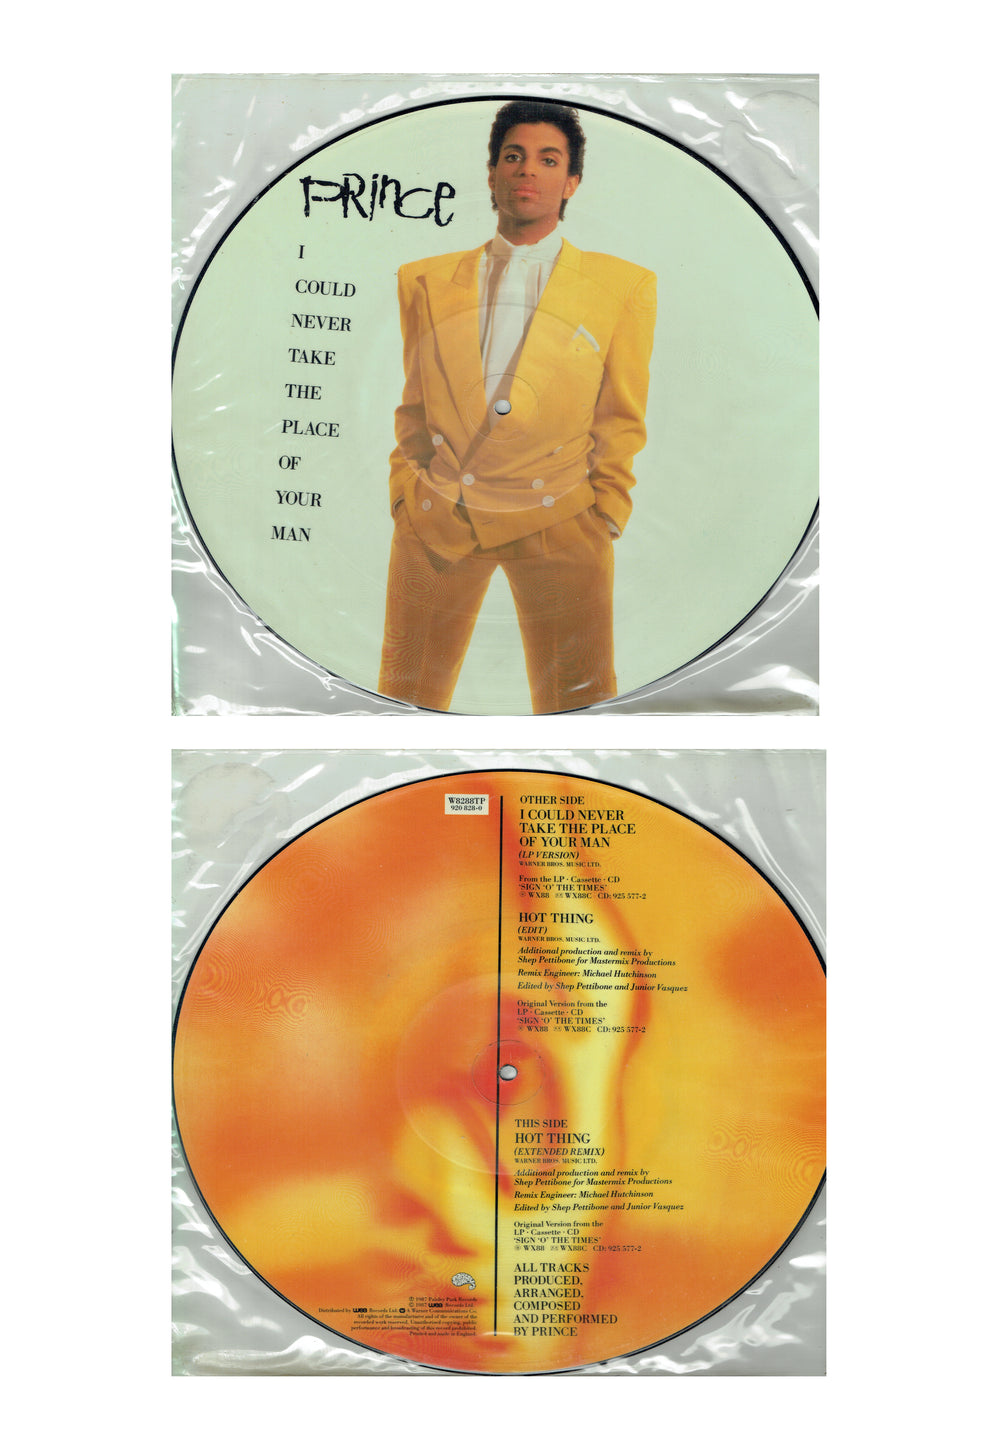 Prince – I Could Never Take The Place Of Your Man Vinyl 12 Inch Picture Disc